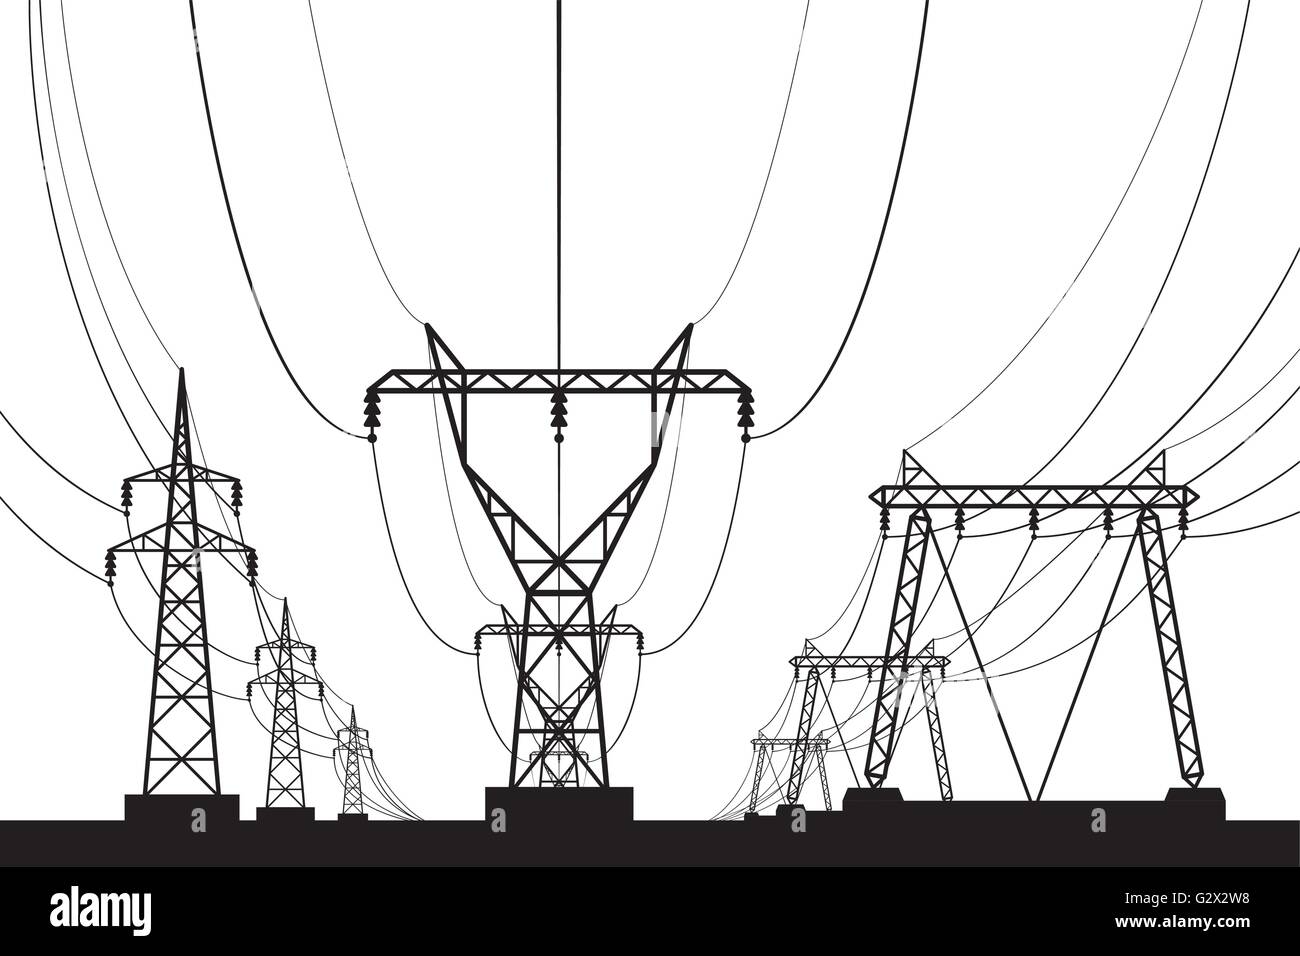 Electrical transmission towers in perspective - vector illustration Stock Vector